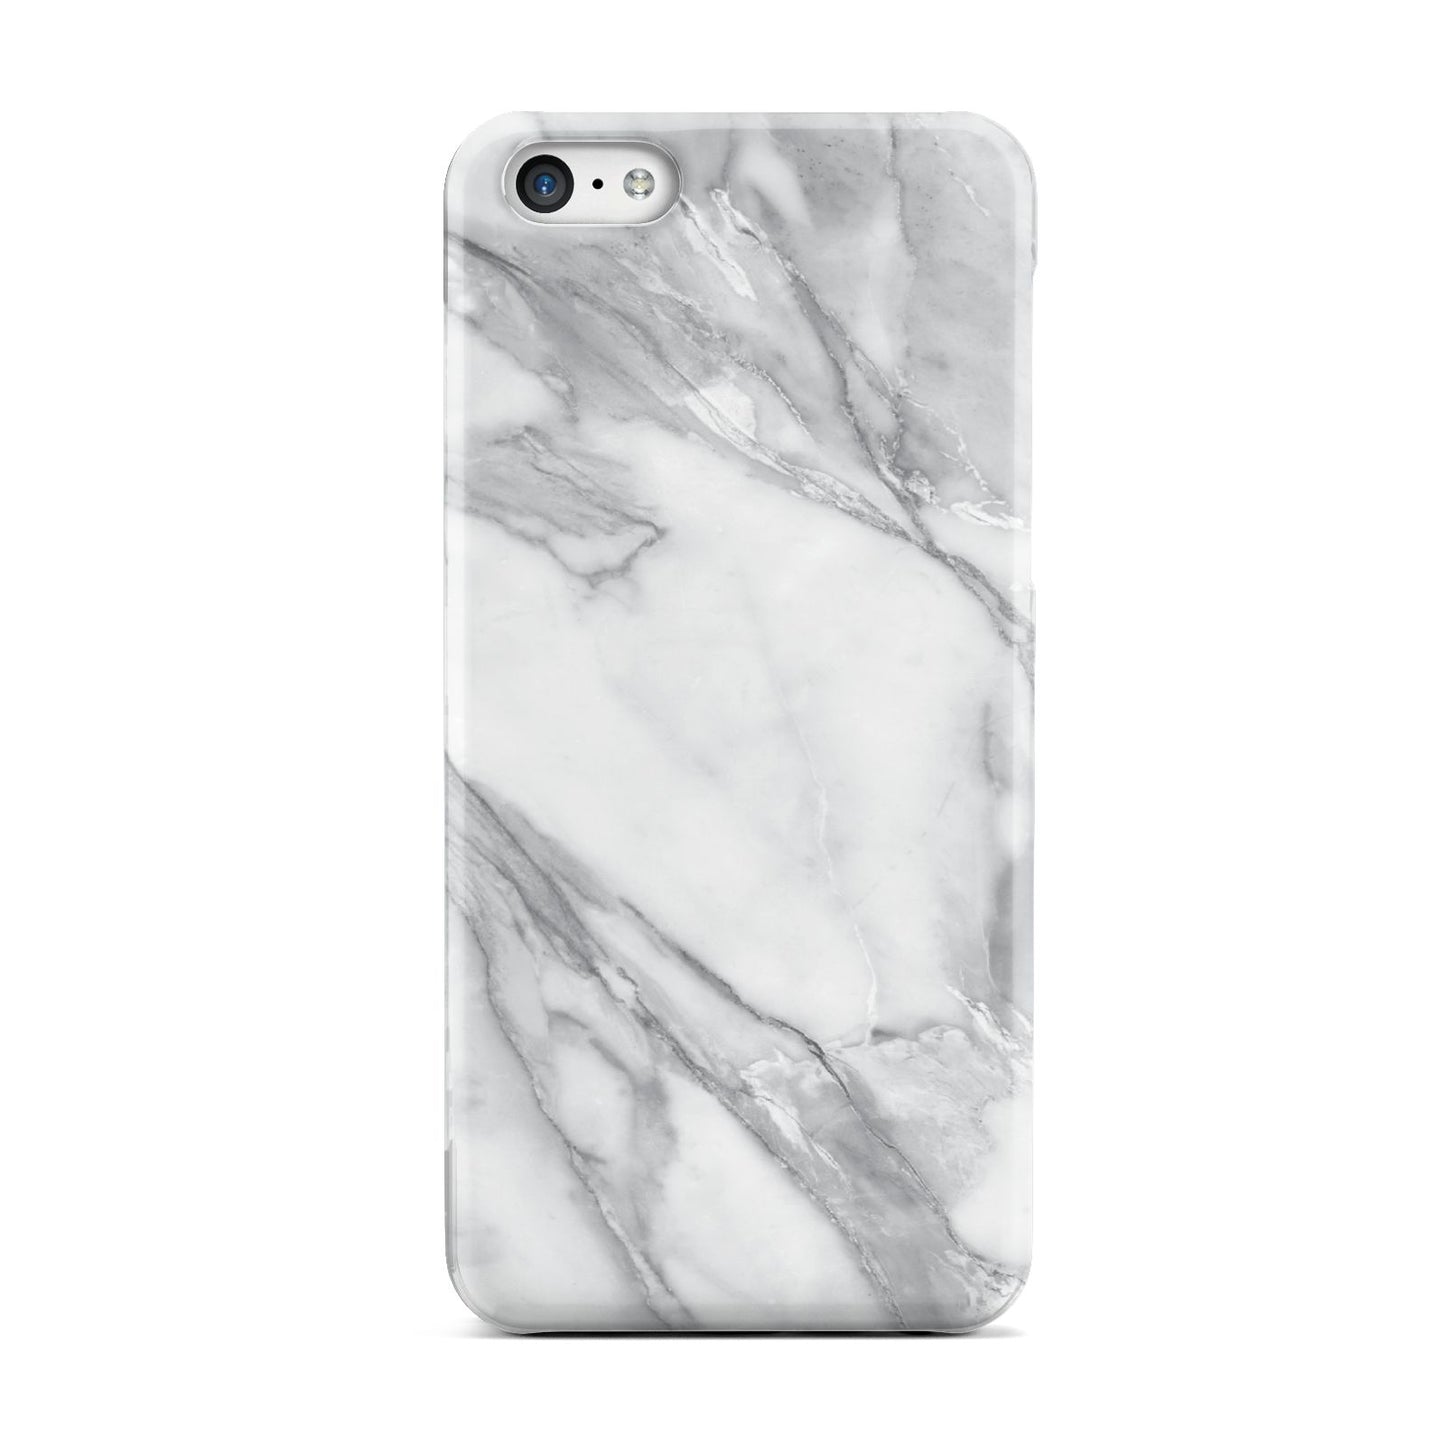 Faux Marble Effect White Grey Apple iPhone 5c Case